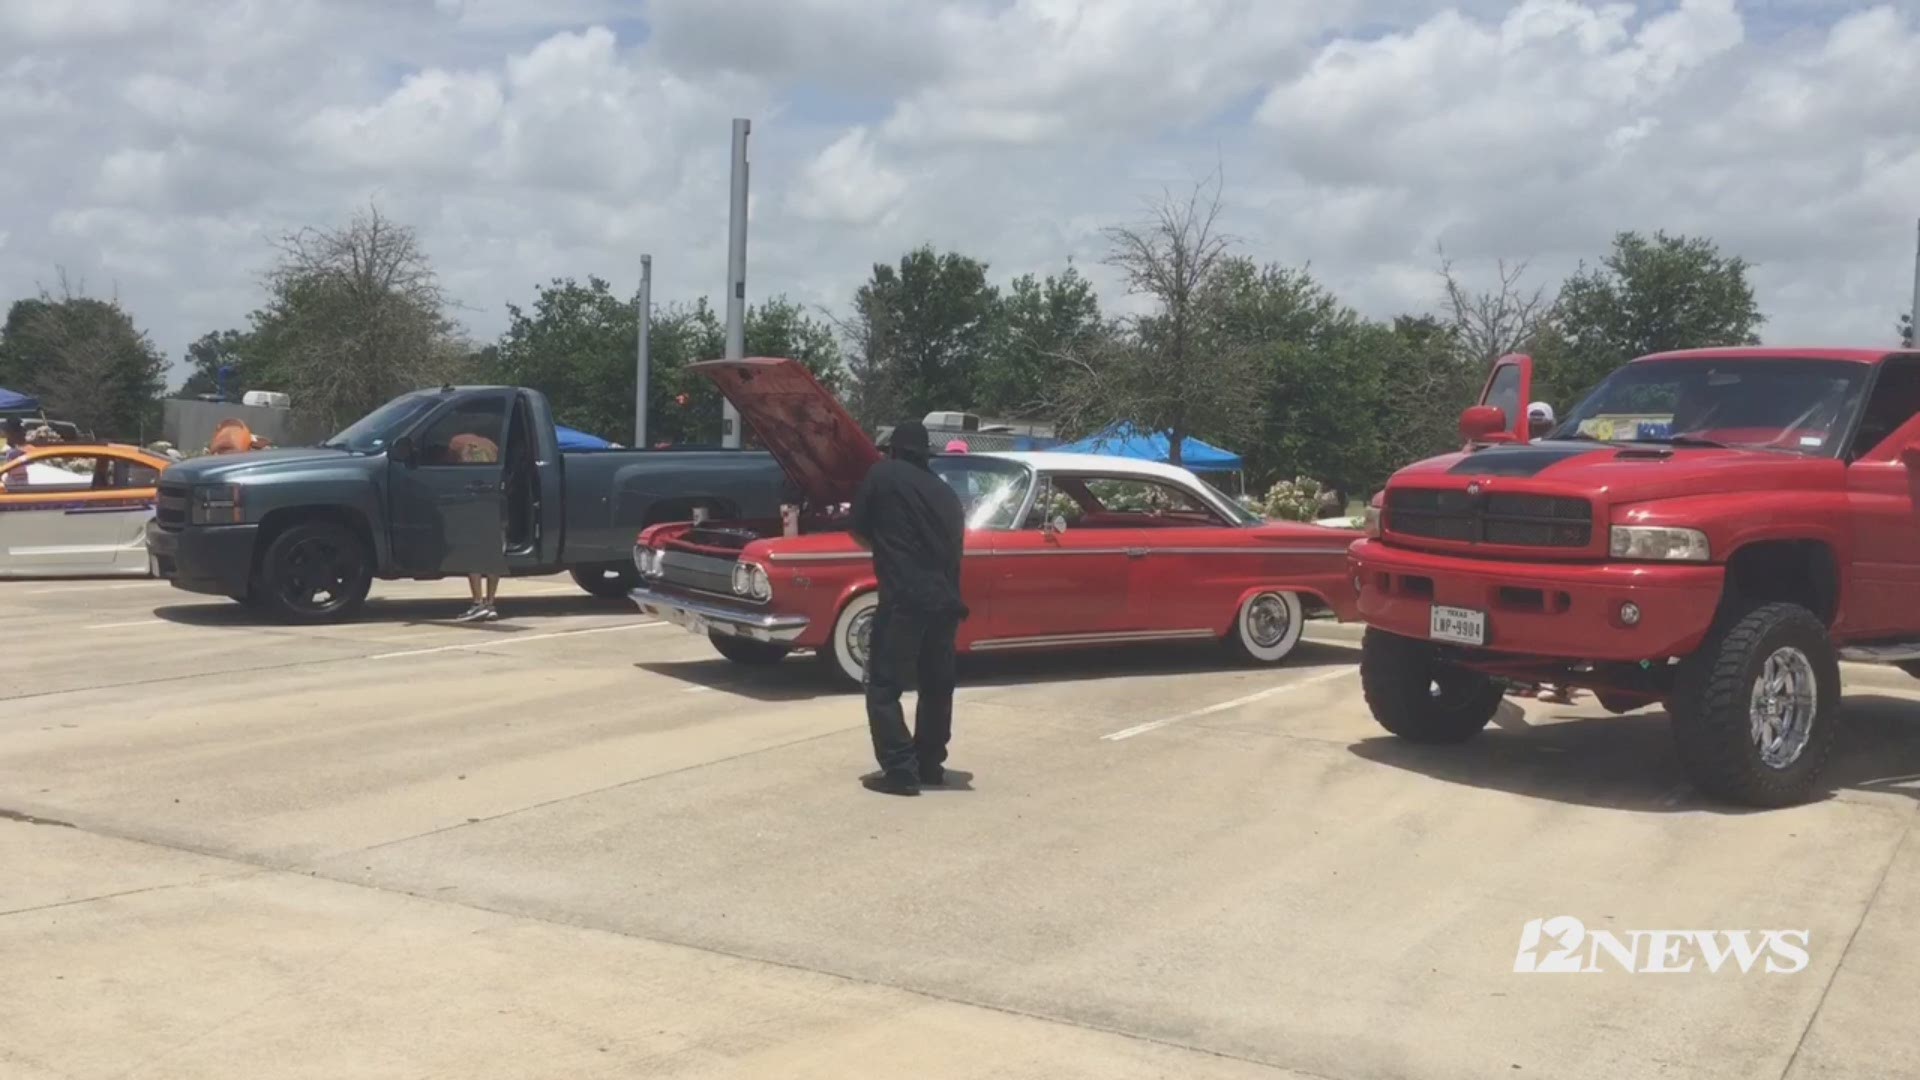 The 5:19 church hosted a Dad Fest with a car show in downtown Beaumont at the Event Centre from 10 a.m. to 1 p.m. for Father's Day, along with food trucks and face painting.